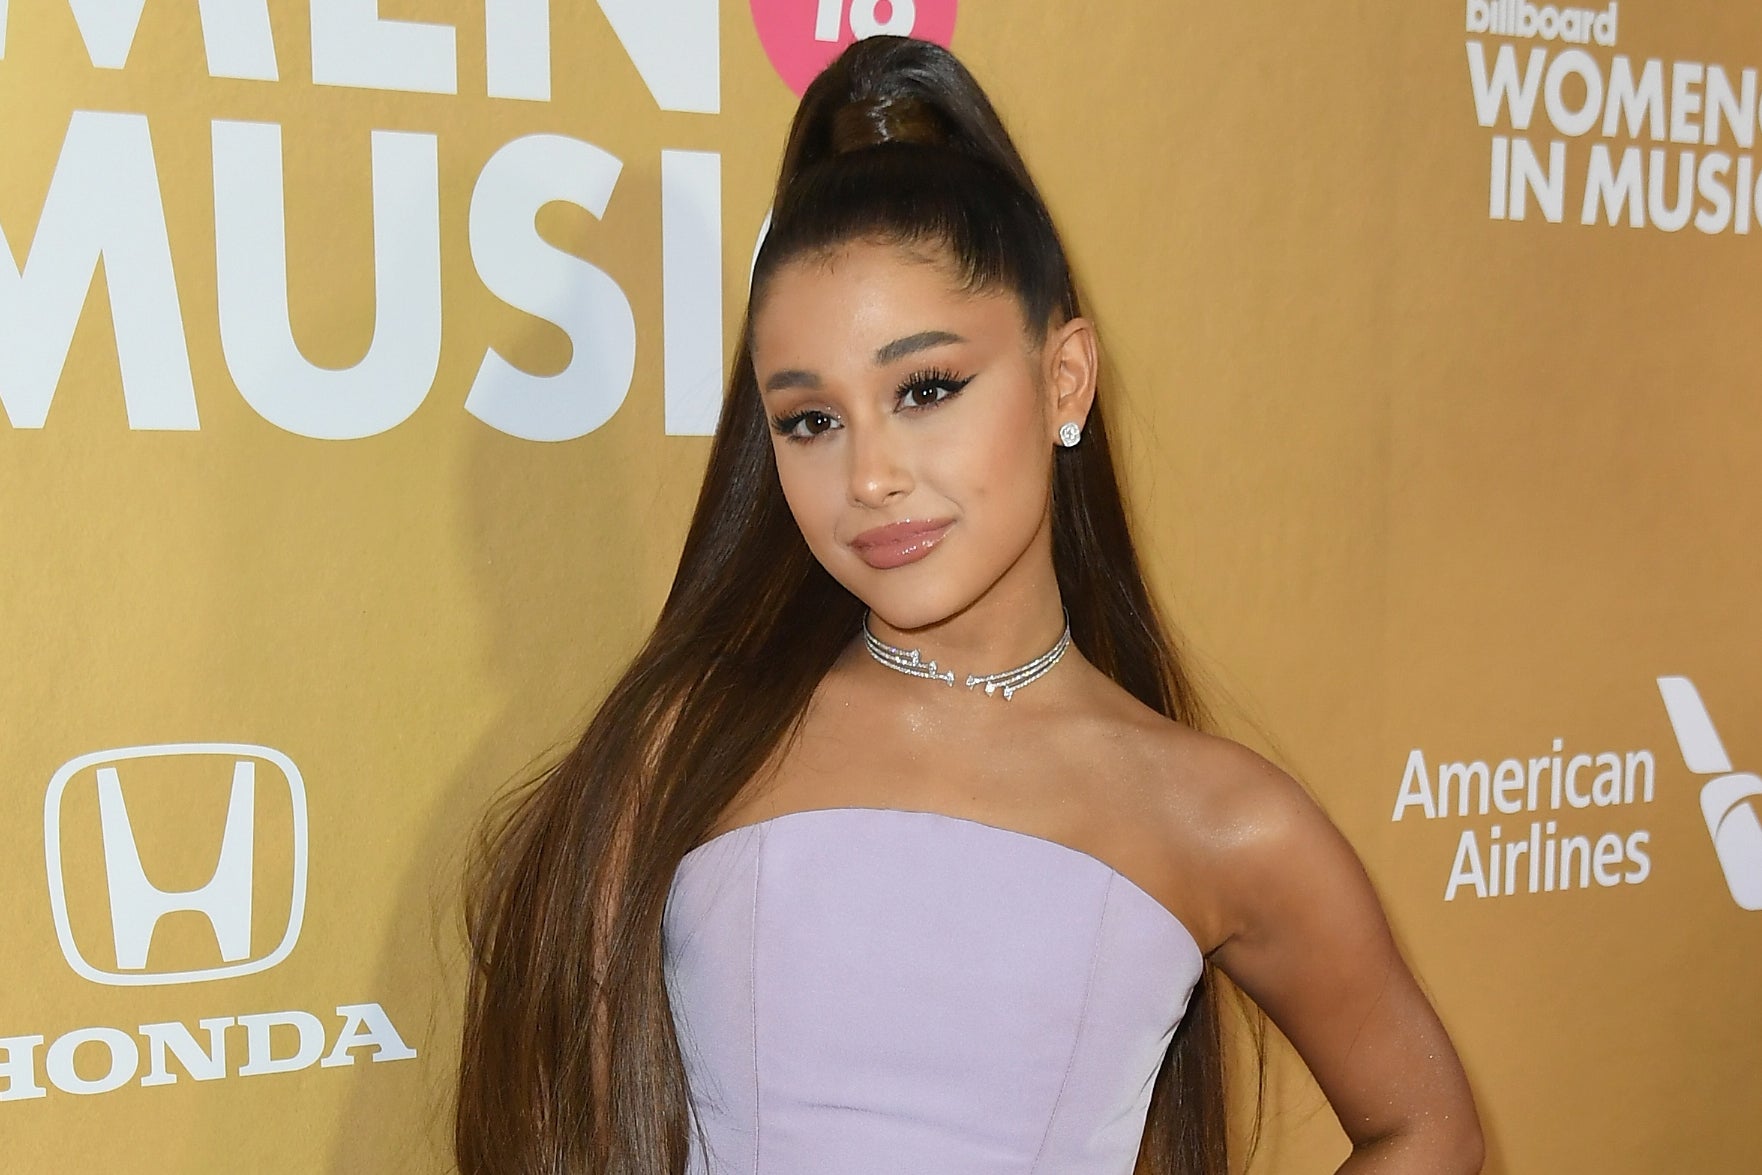 Ariana Grande Accused Of Cultural Appropriation By Speaking